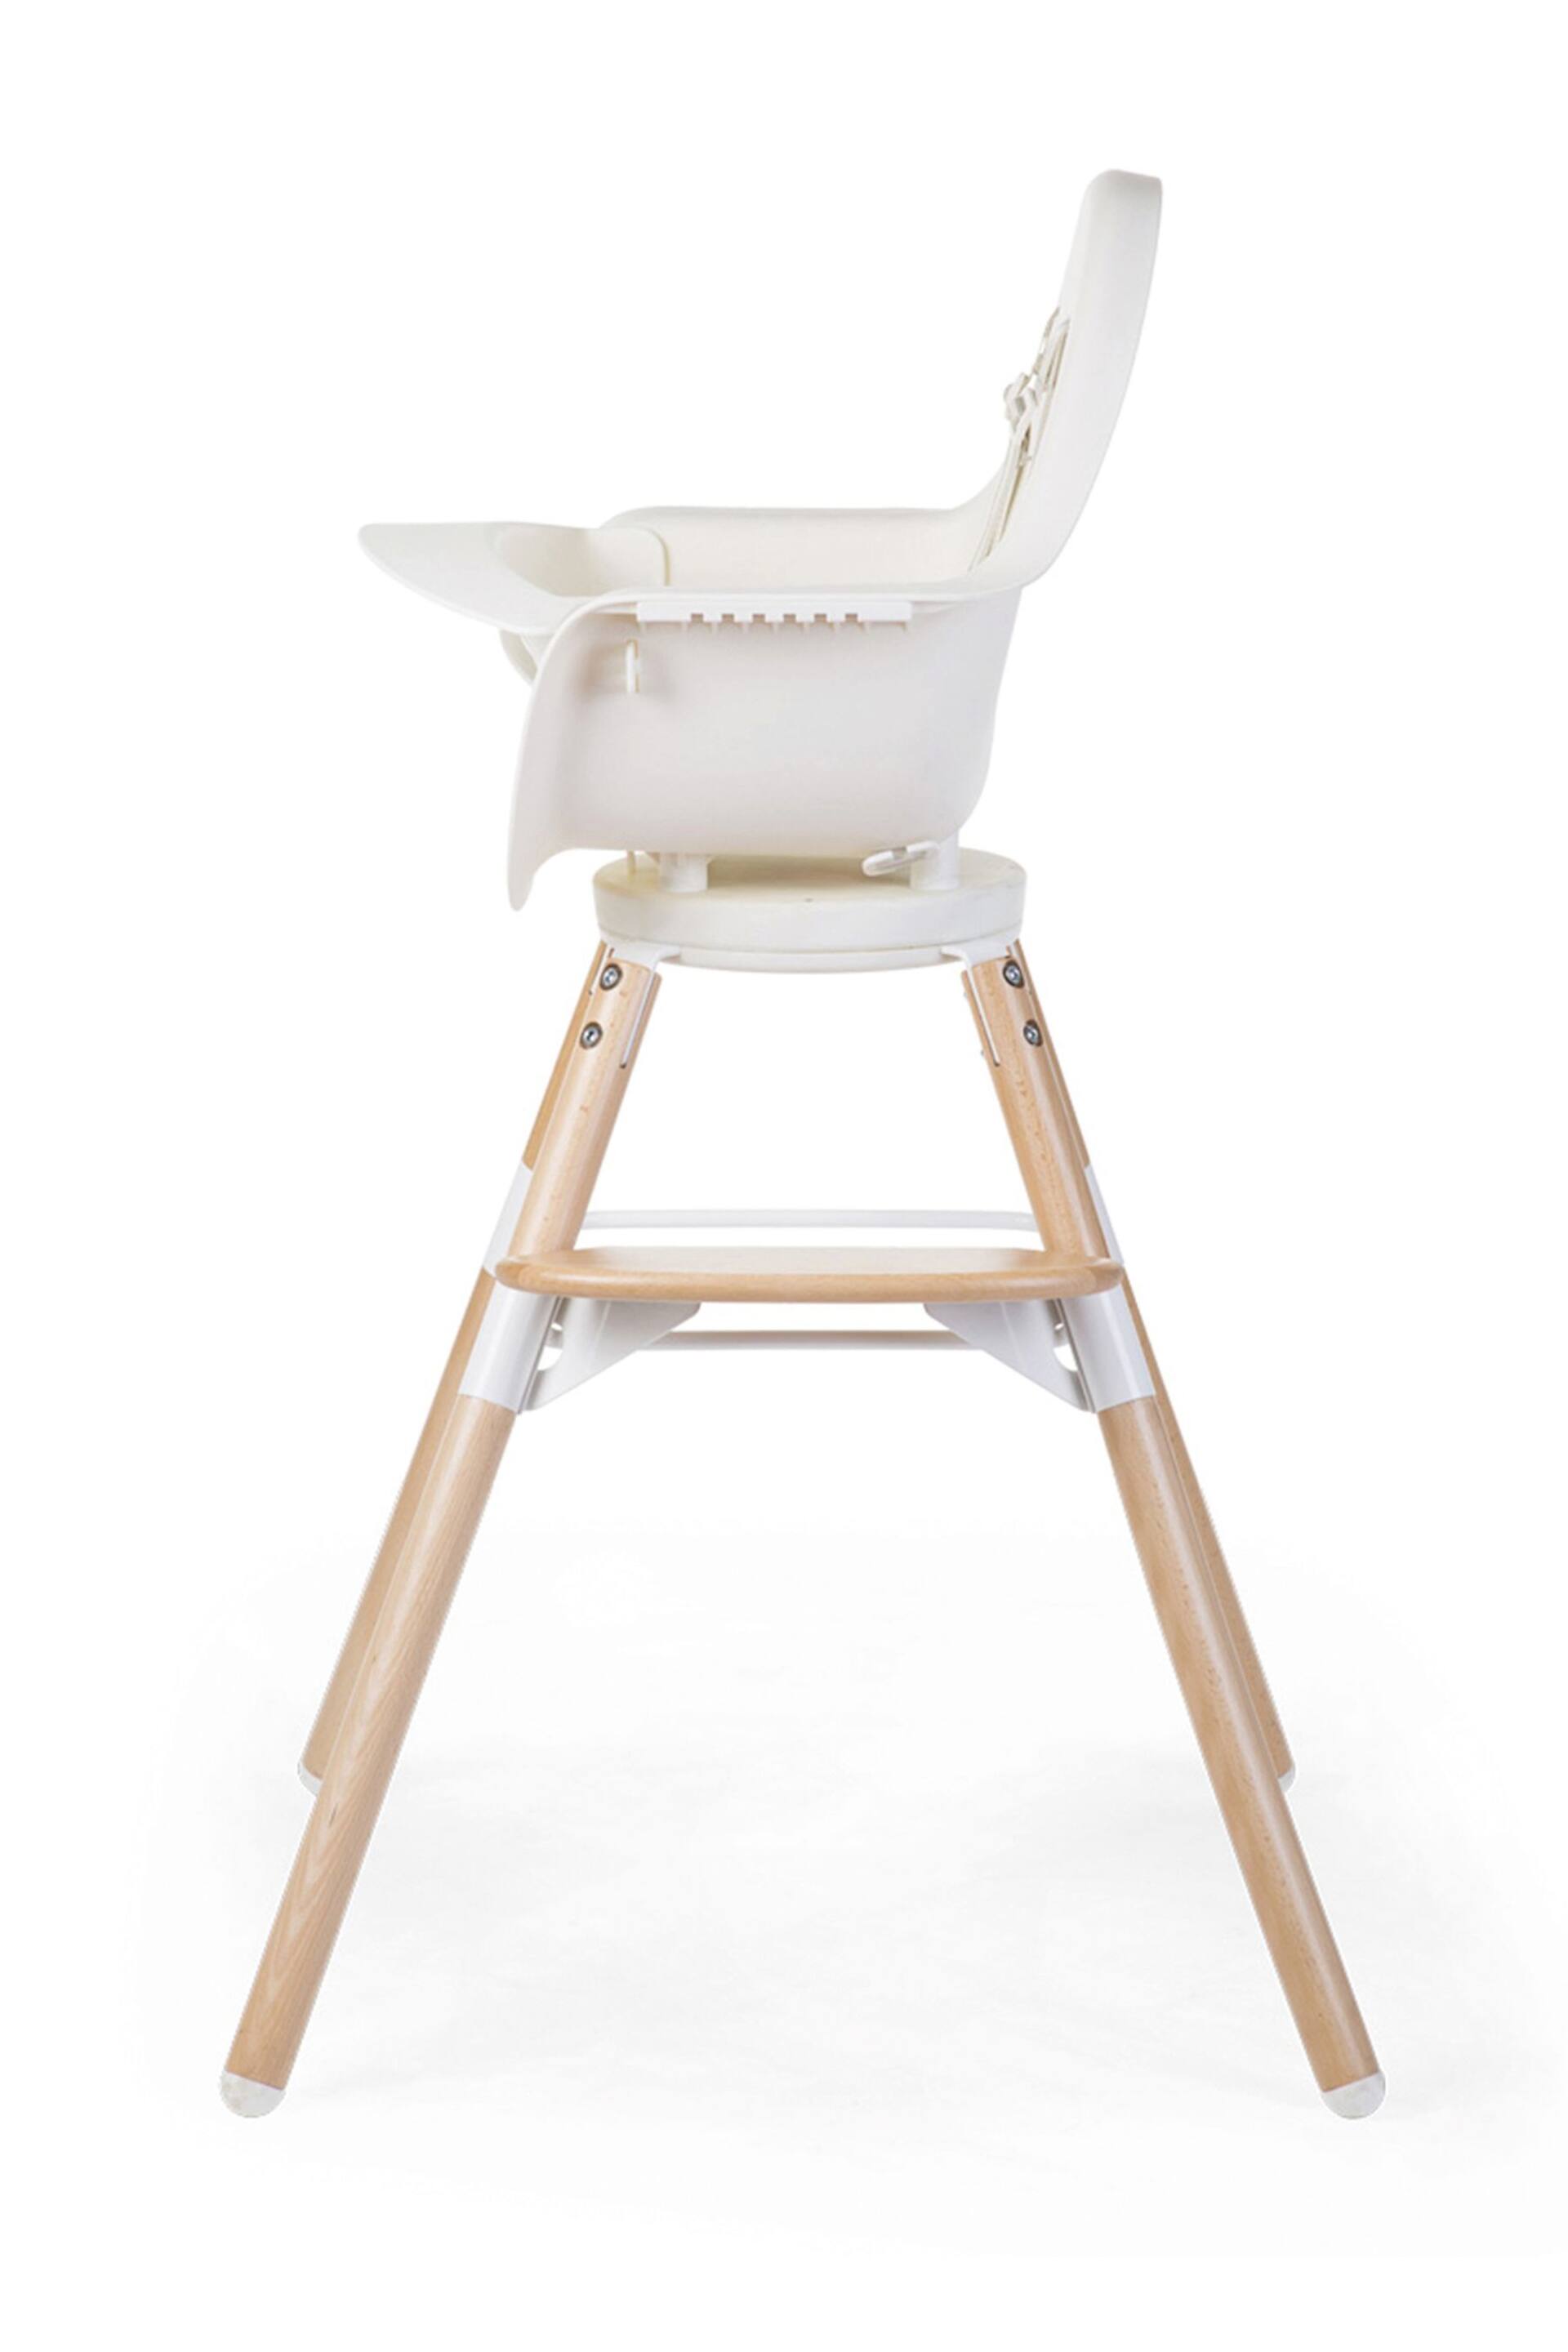 Childhome White Evolu One 80° High Chair White - Image 4 of 10